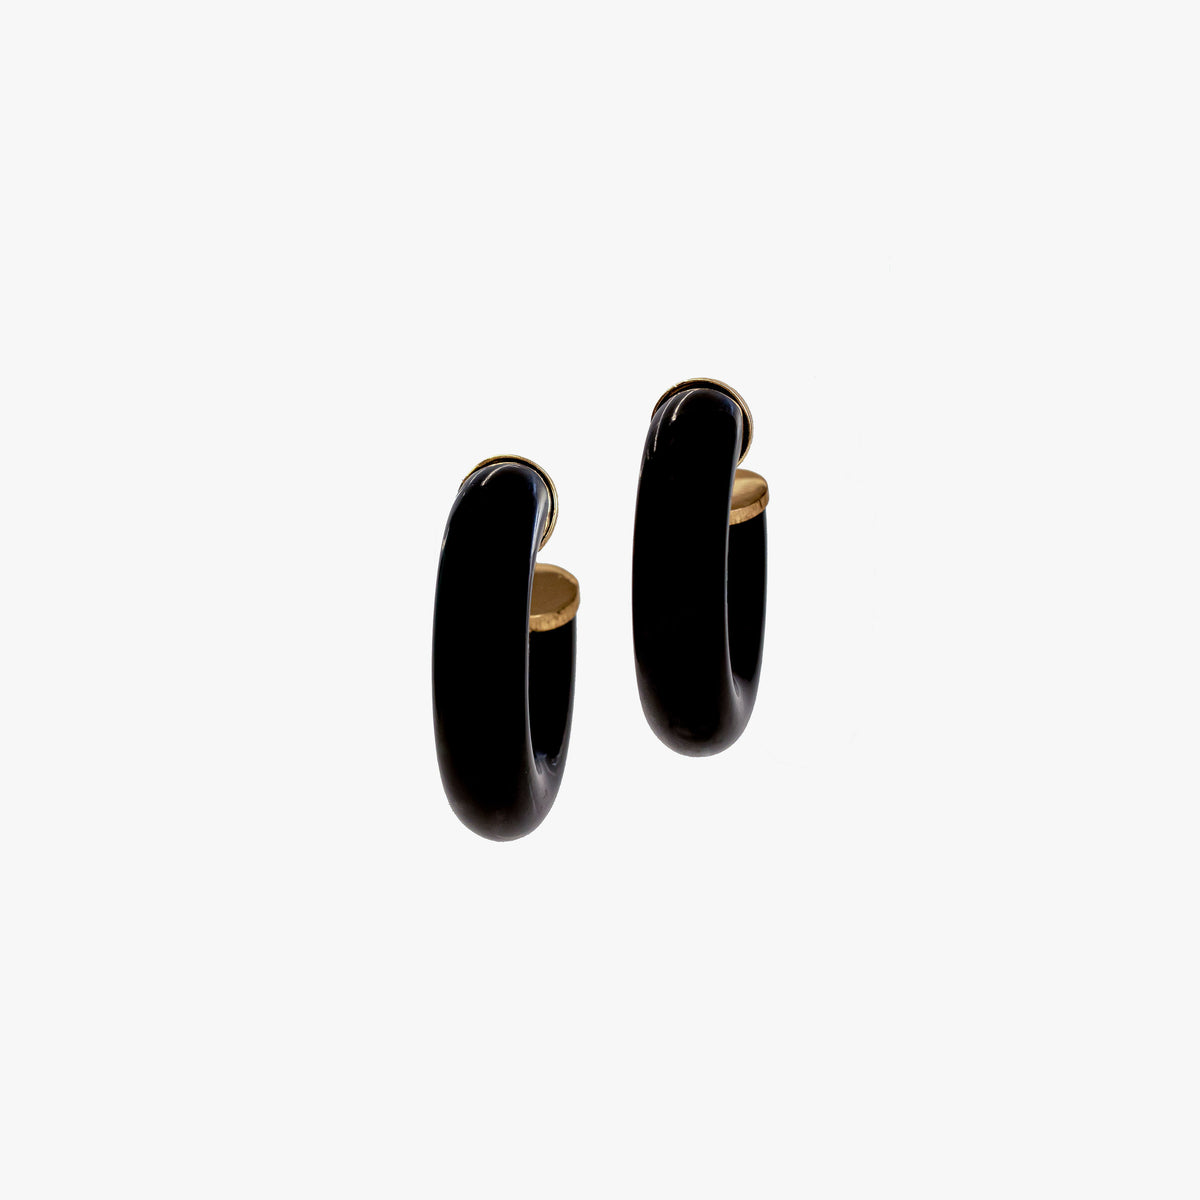 Earrings with diamond and black lacquer hoop